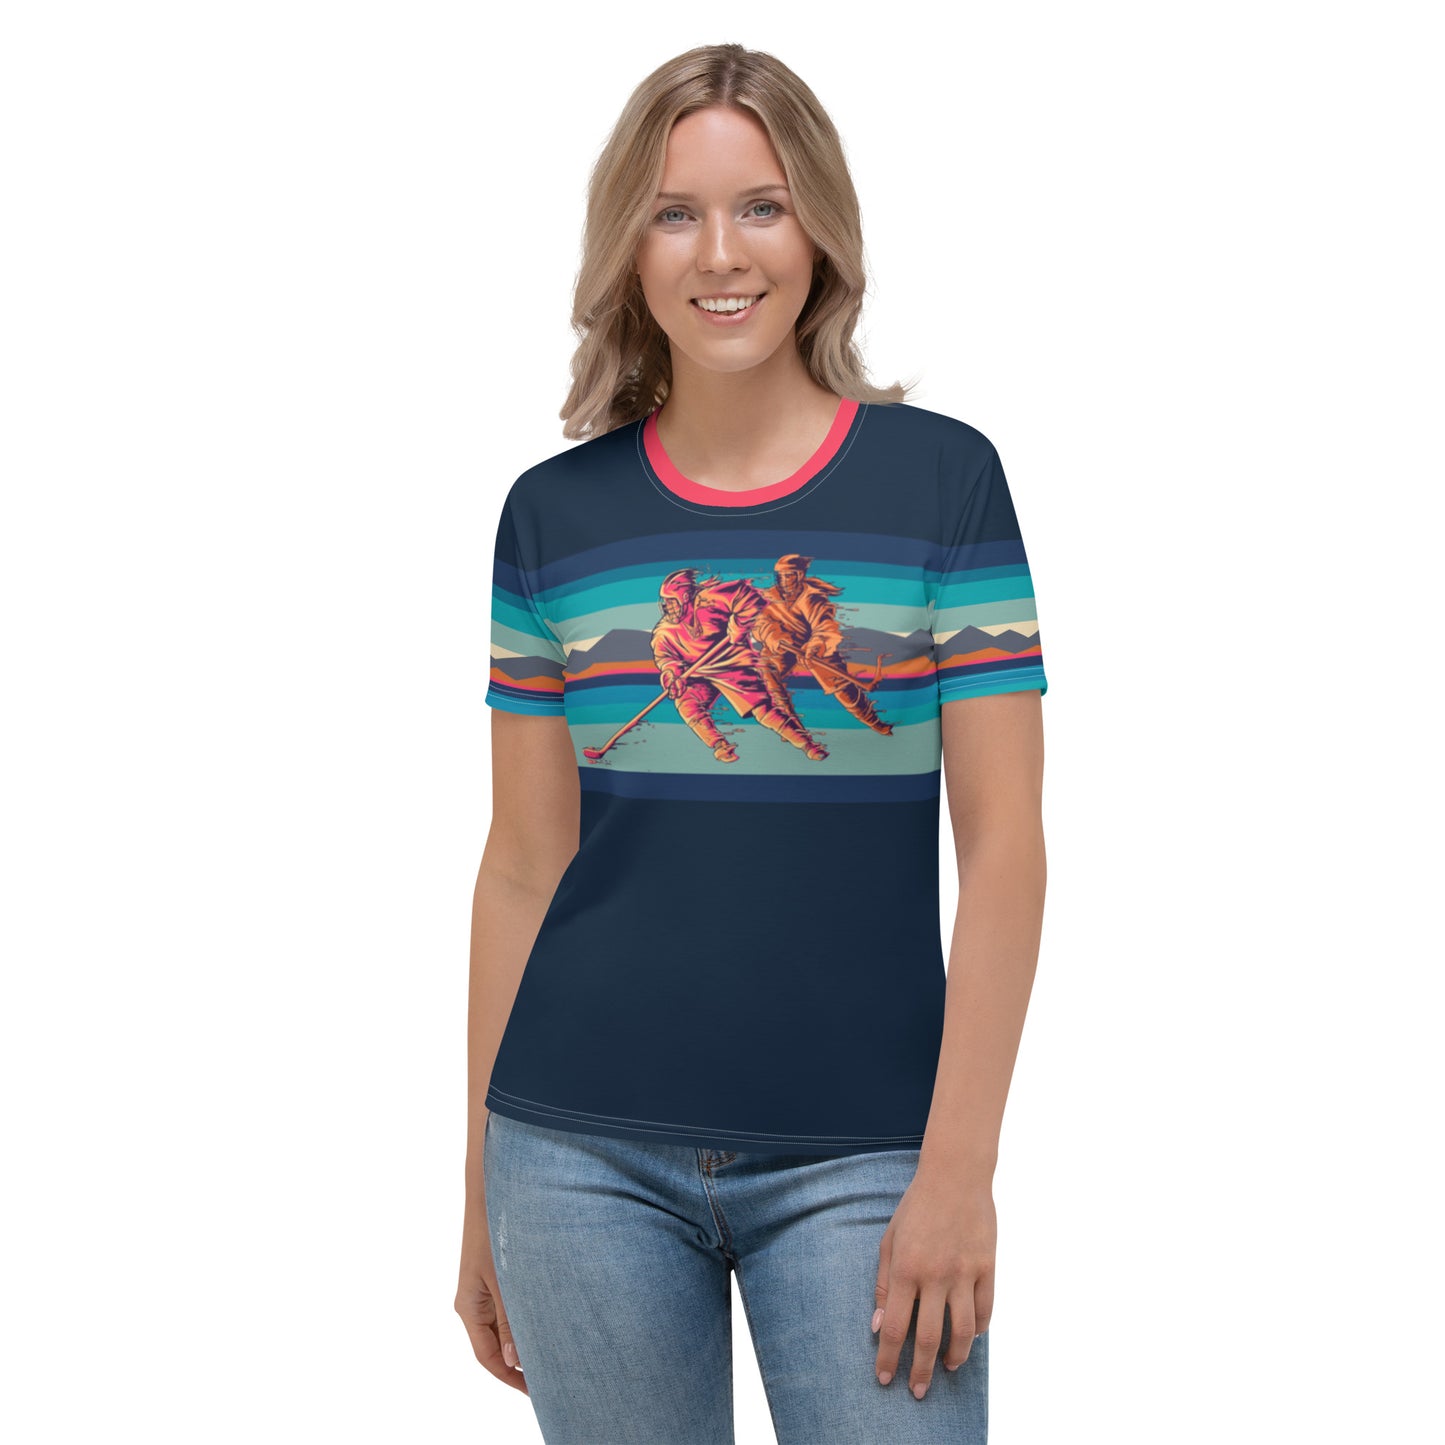 Need for Speed Women's T-shirt